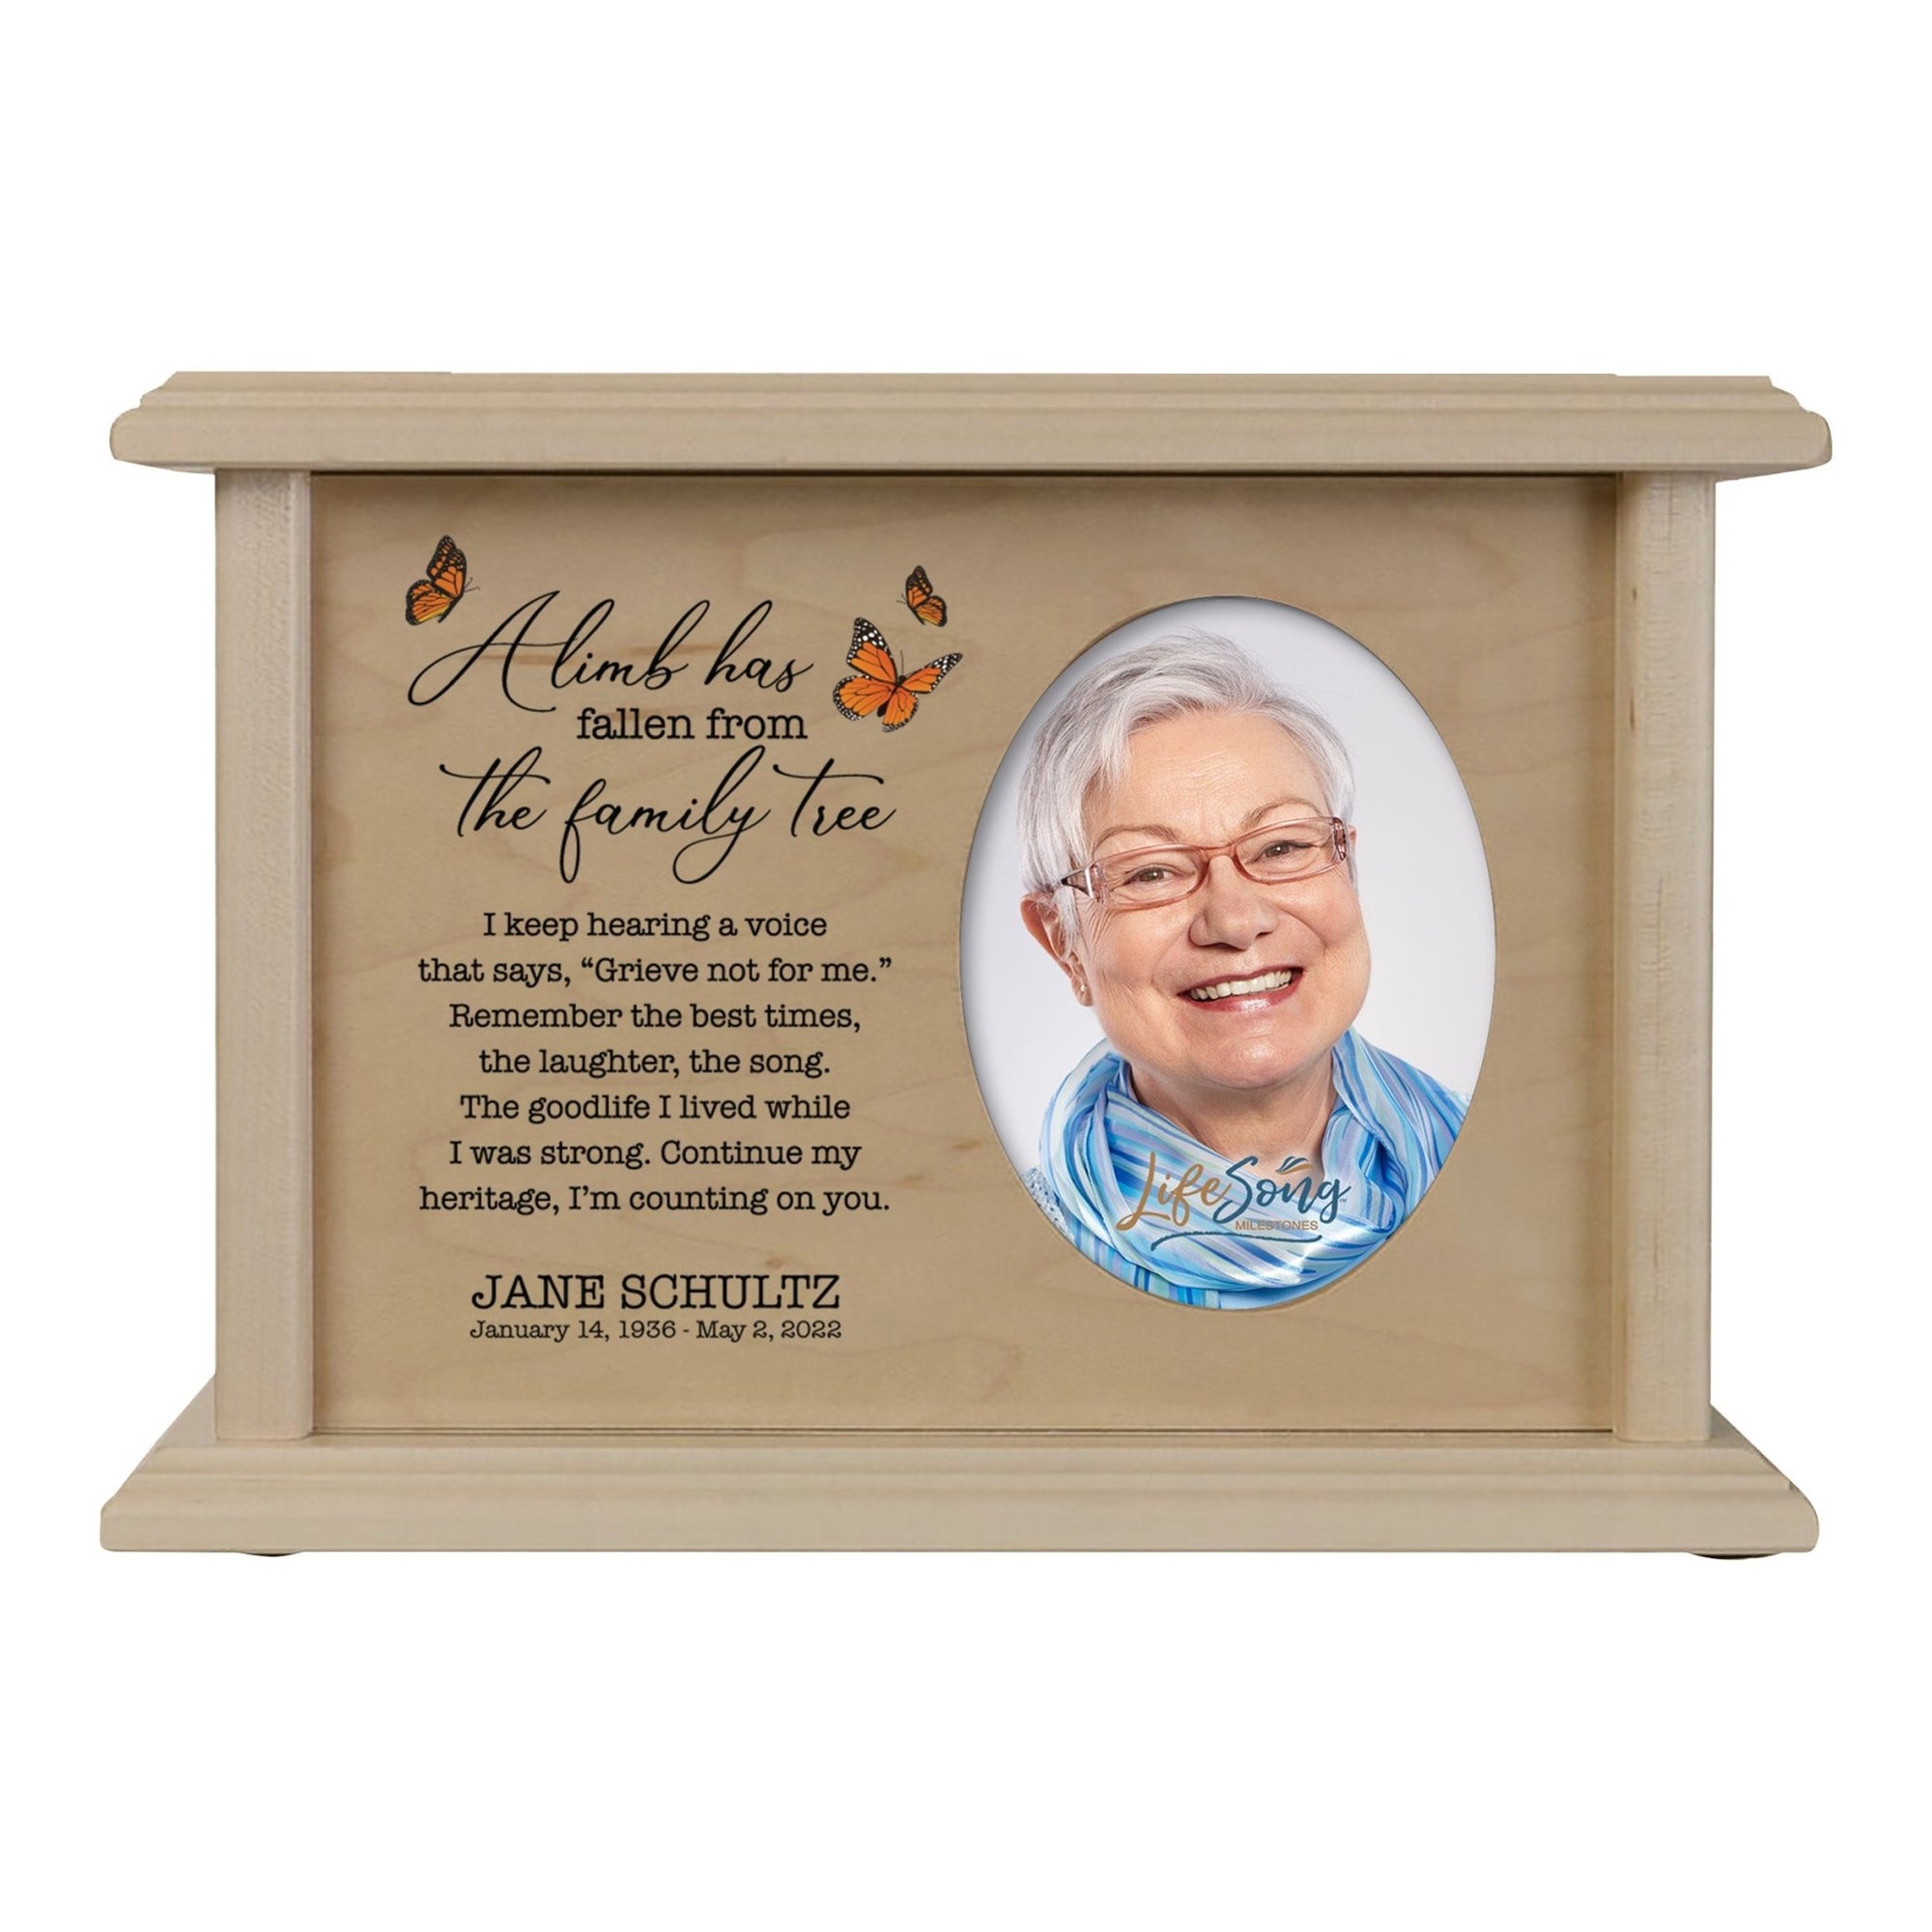 Personalized Vintage-Inspired Memorial Cremation Wooden Oval Photo Urn For Human Ashes - A Limb Has fallen - LifeSong Milestones